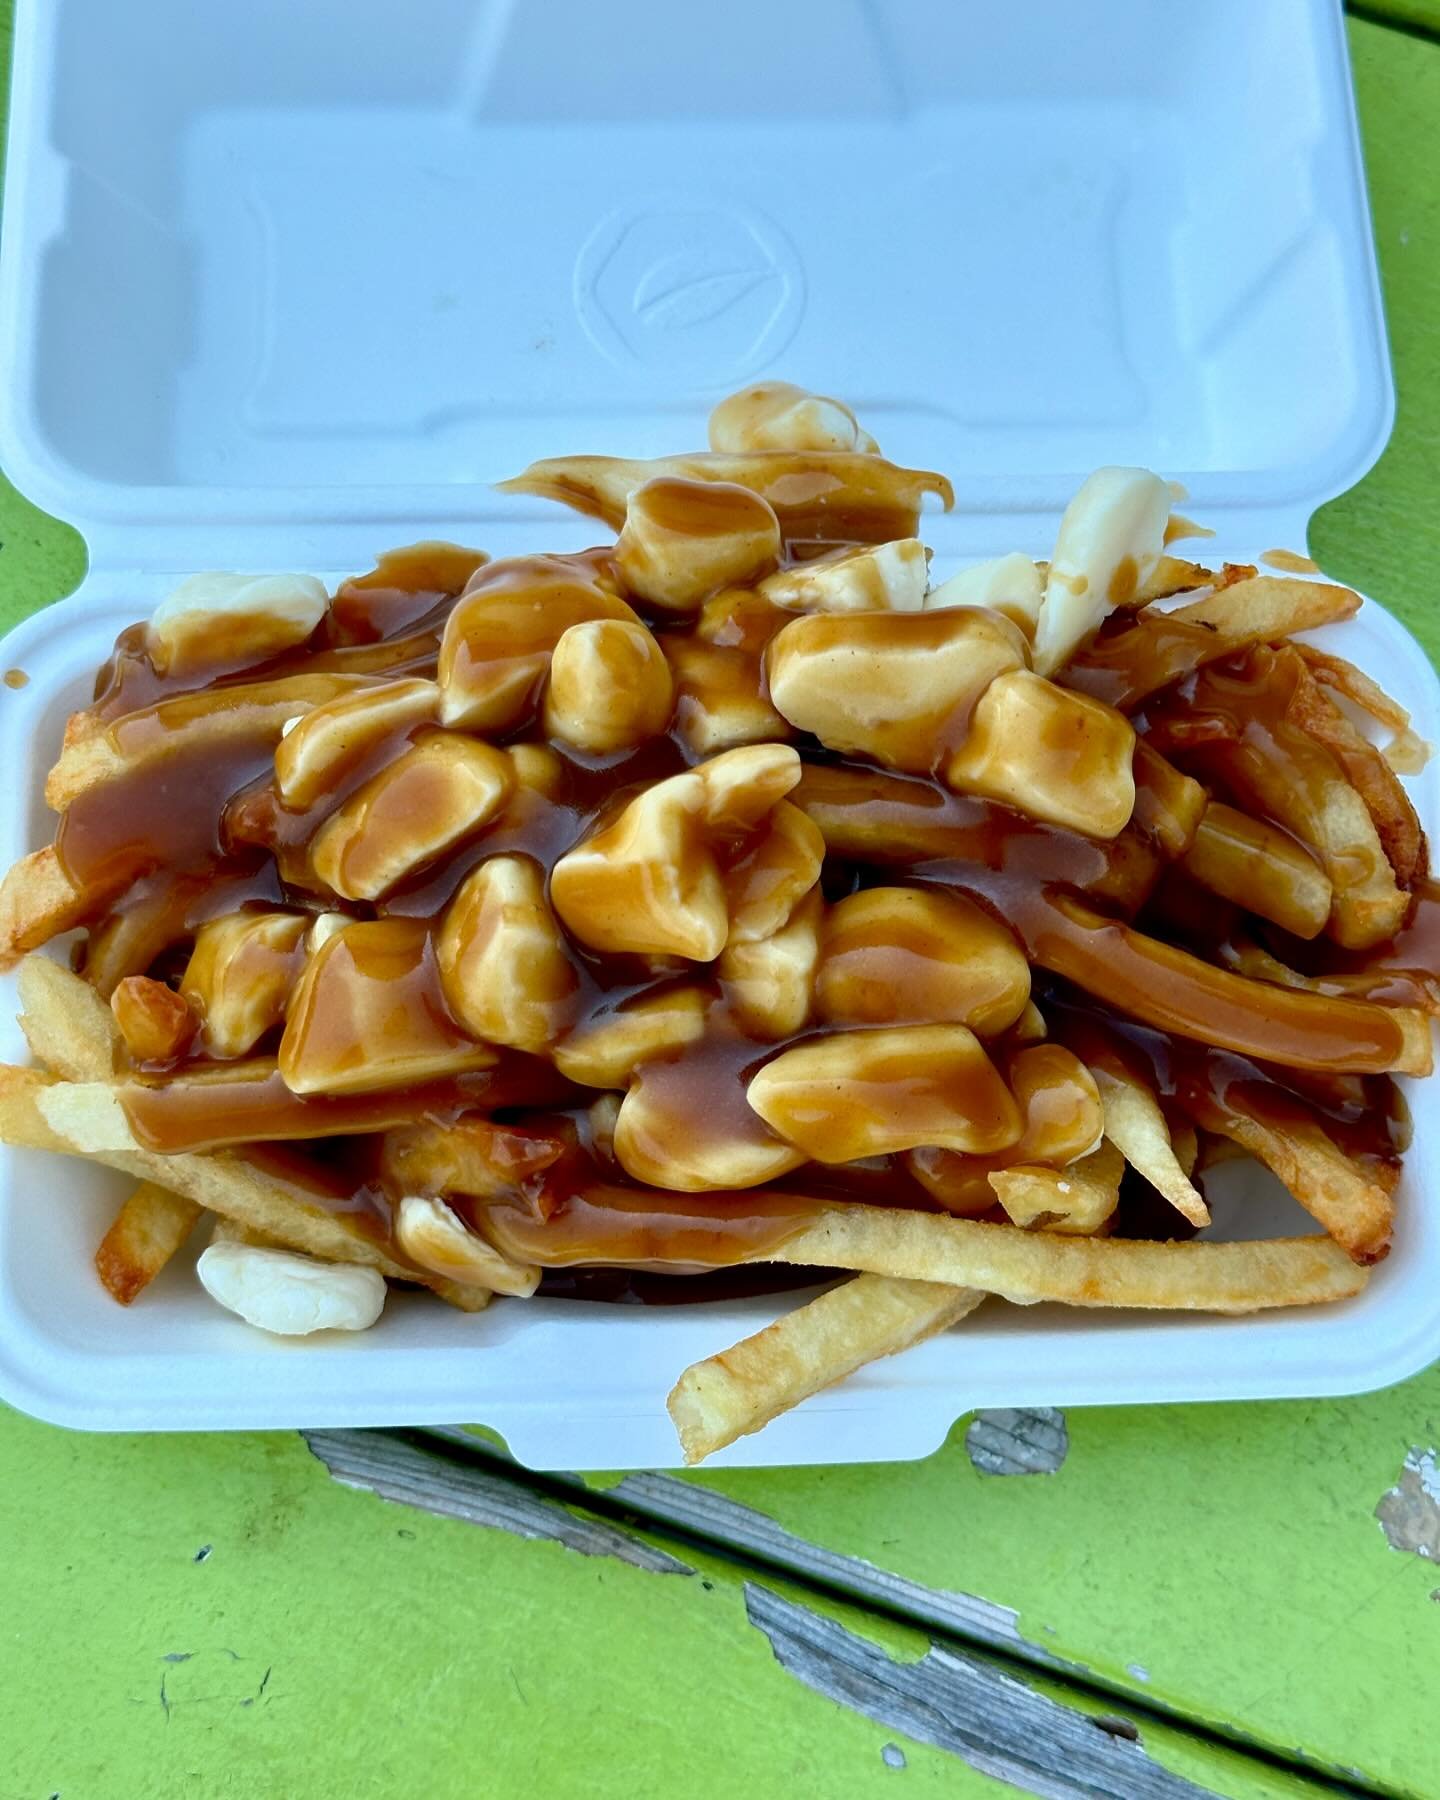 Amazing poutine fries at Niko&rsquo;s Place in Niagara Falls, Canada! 🍟🧀 Did you know that fresh cheese curds squeak when you bite into them? That&rsquo;s because they&rsquo;re so fresh, the elastic protein strands rub against your teeth, creating 